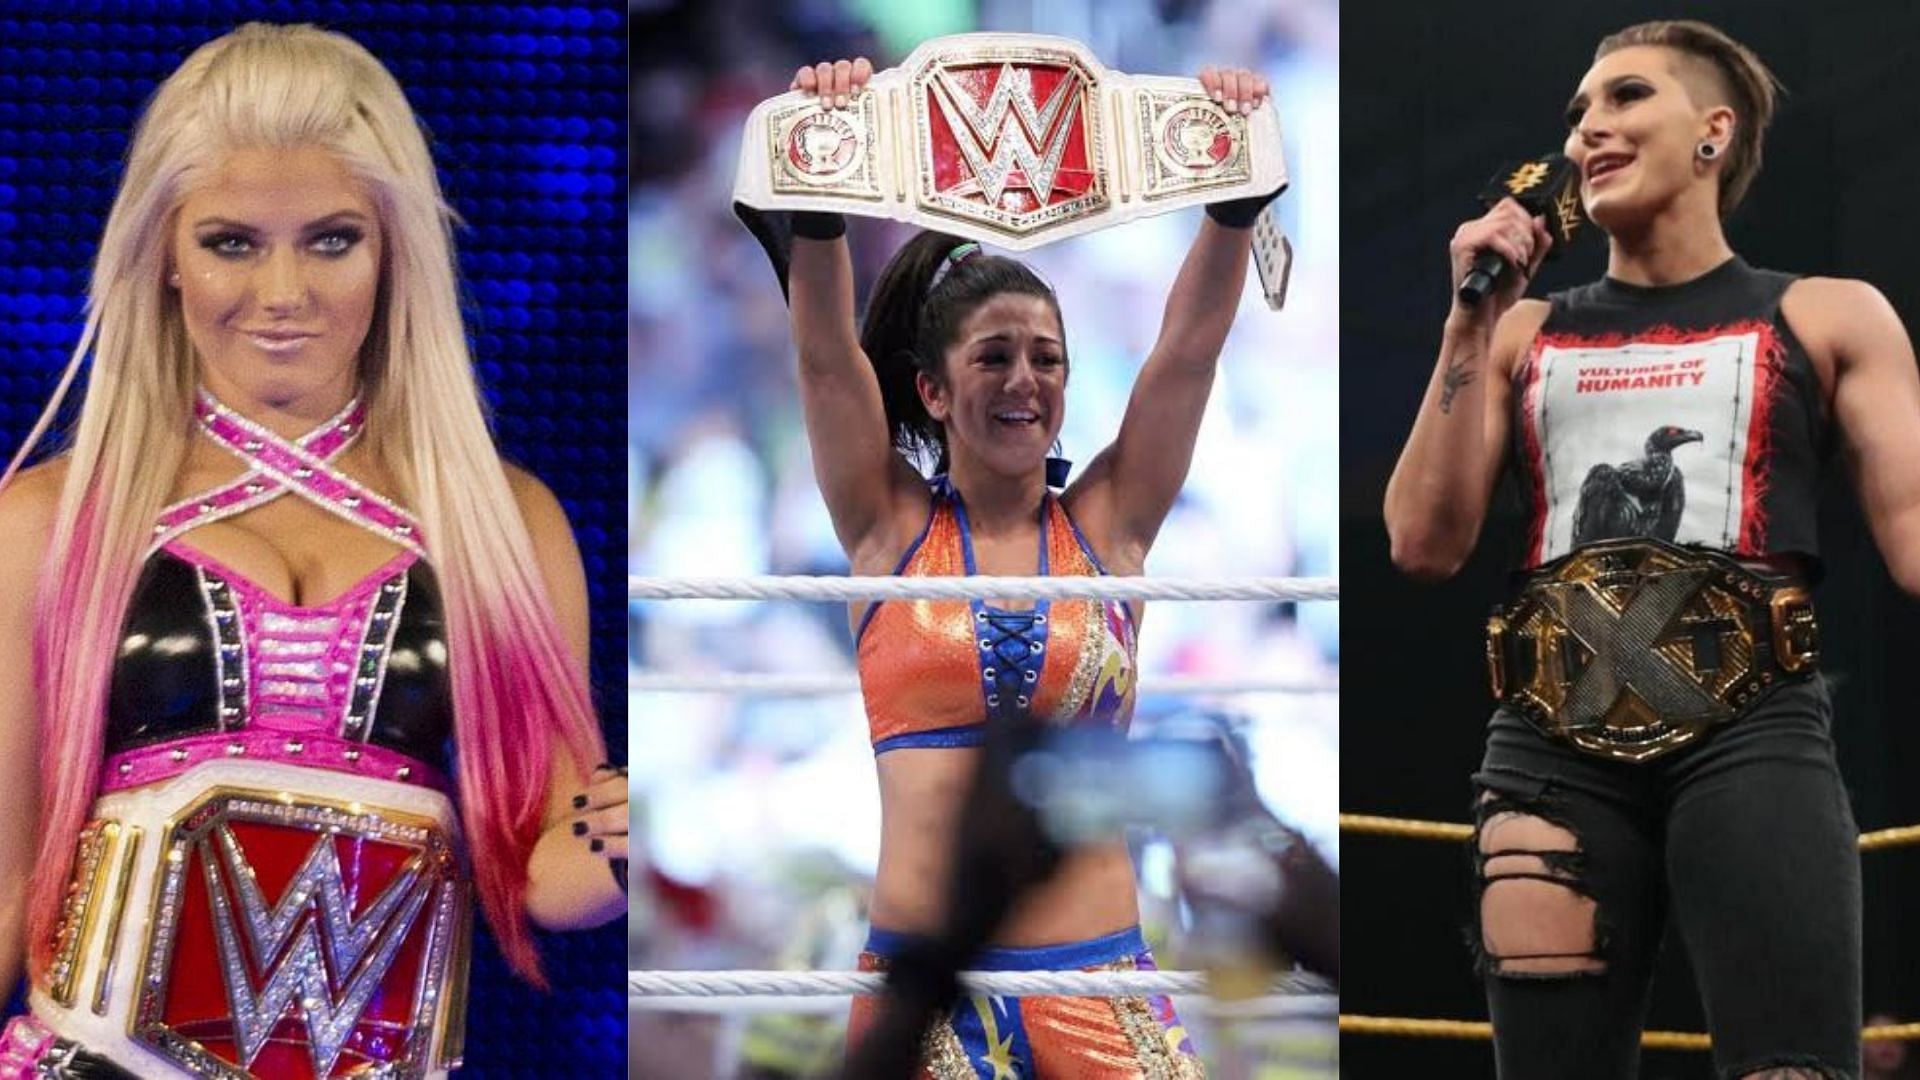 Alexa Bliss, Bayley, and Rhea Ripley have all featured at The Grandest Stage of Them All over the last 5 years